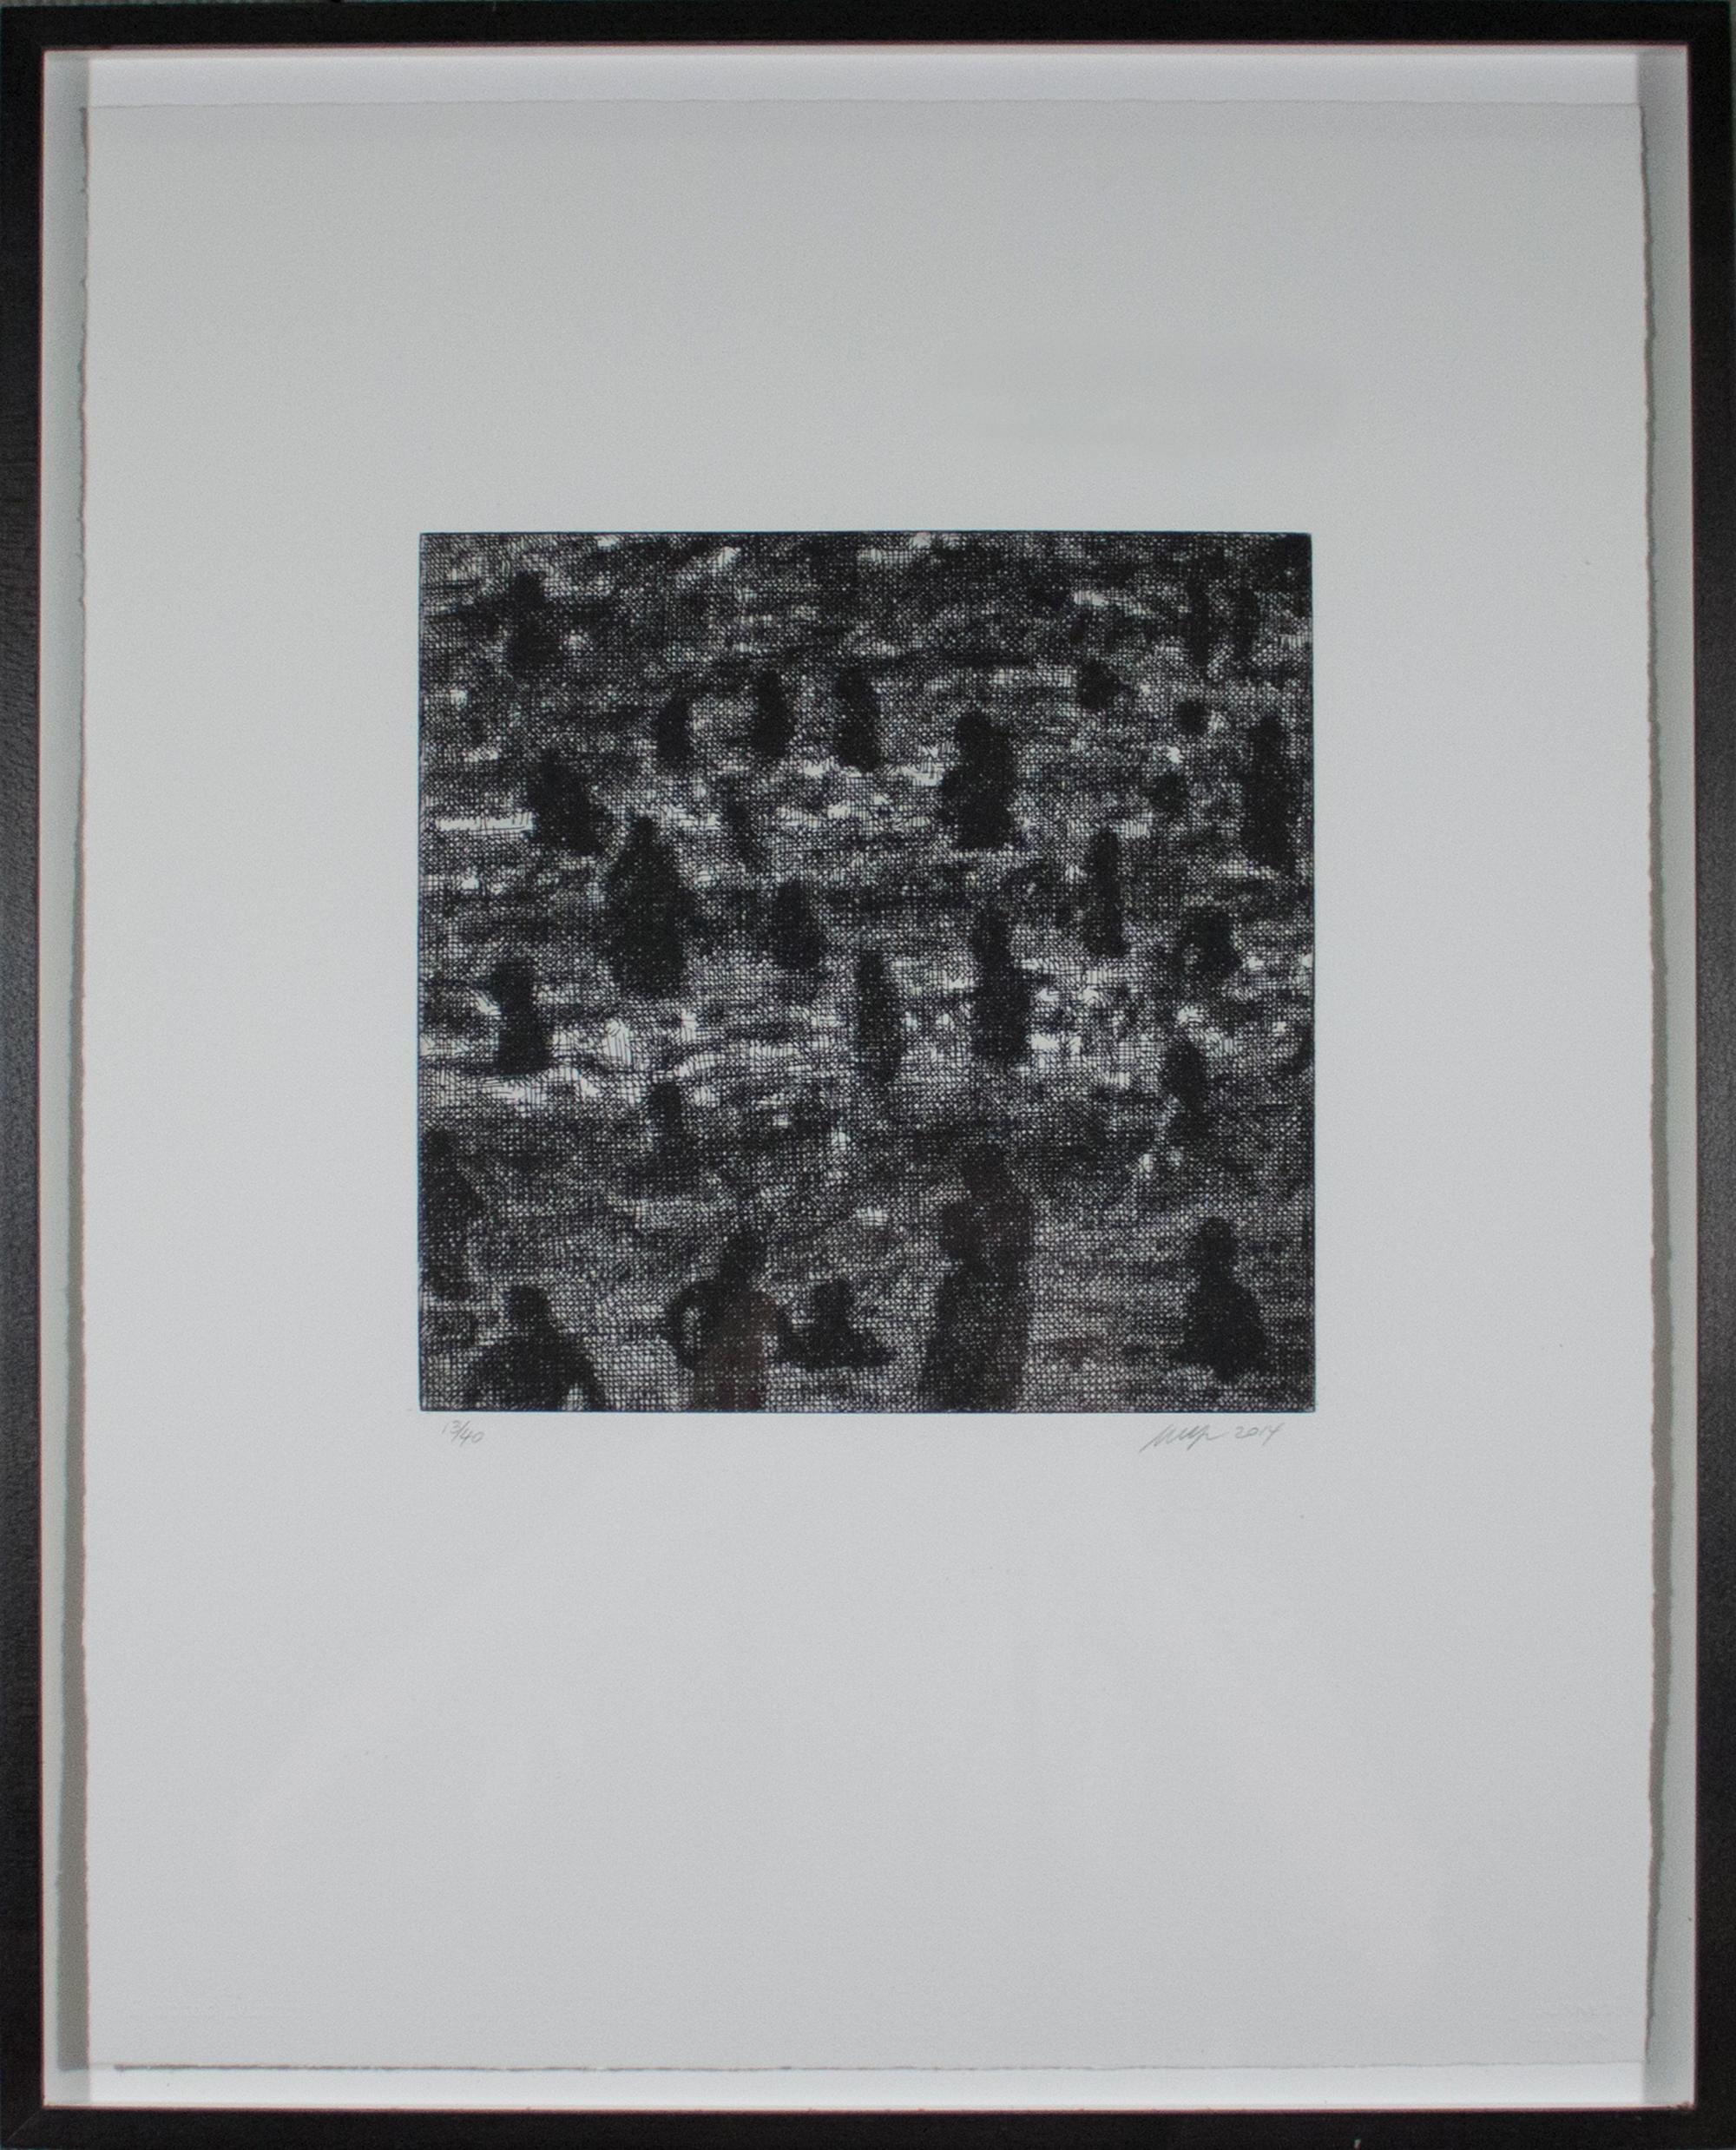 From the Wayne Gonzales portfolio ""Crowd"" which contained five copper plate etchings.
Printed on Hahnemuhle 300 GSM Paper
In an Edition of 40 with 10 artist's proofs
Hand signed and numbered 13 out of 40 by Gonzales
Framed in a black wooden frame